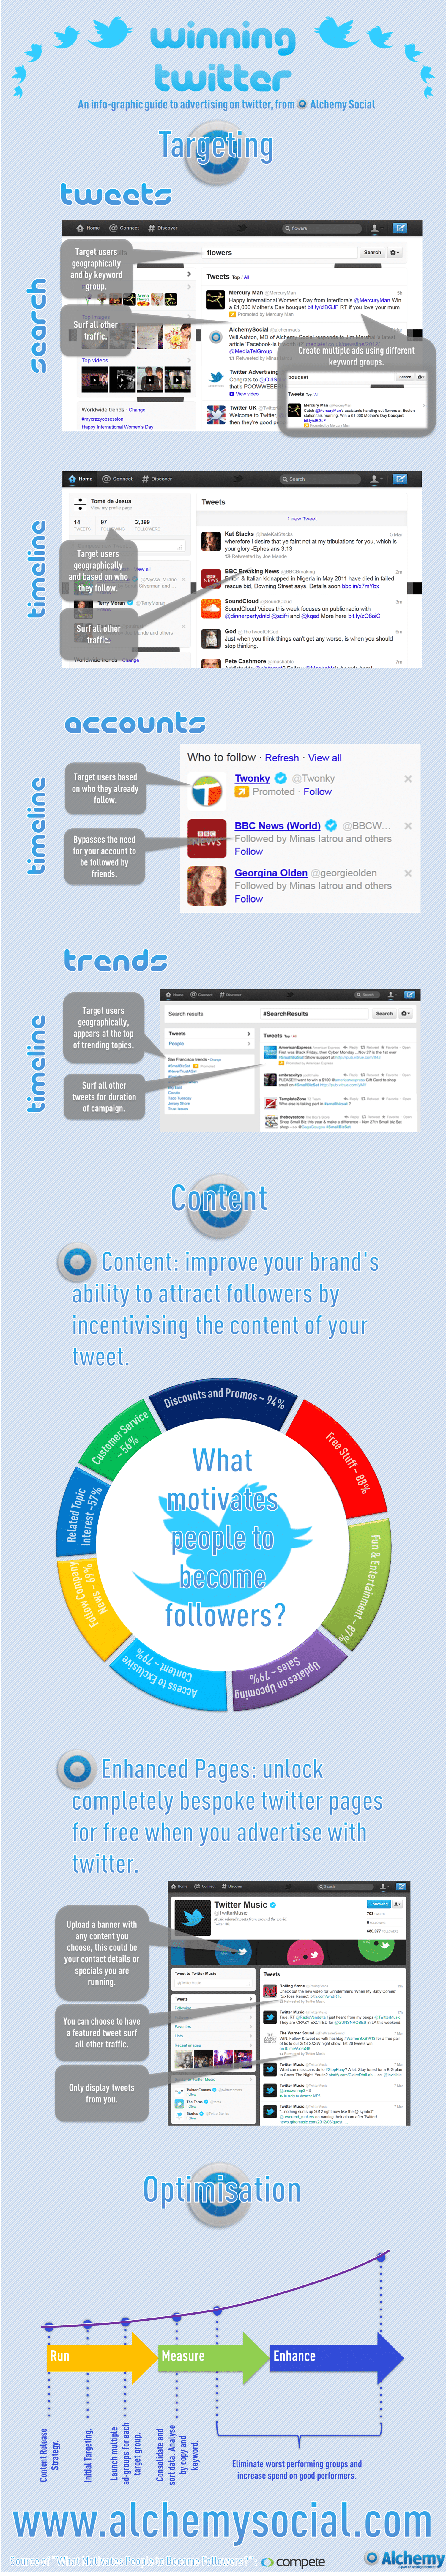 twitter-following-optimization-guide-infographic